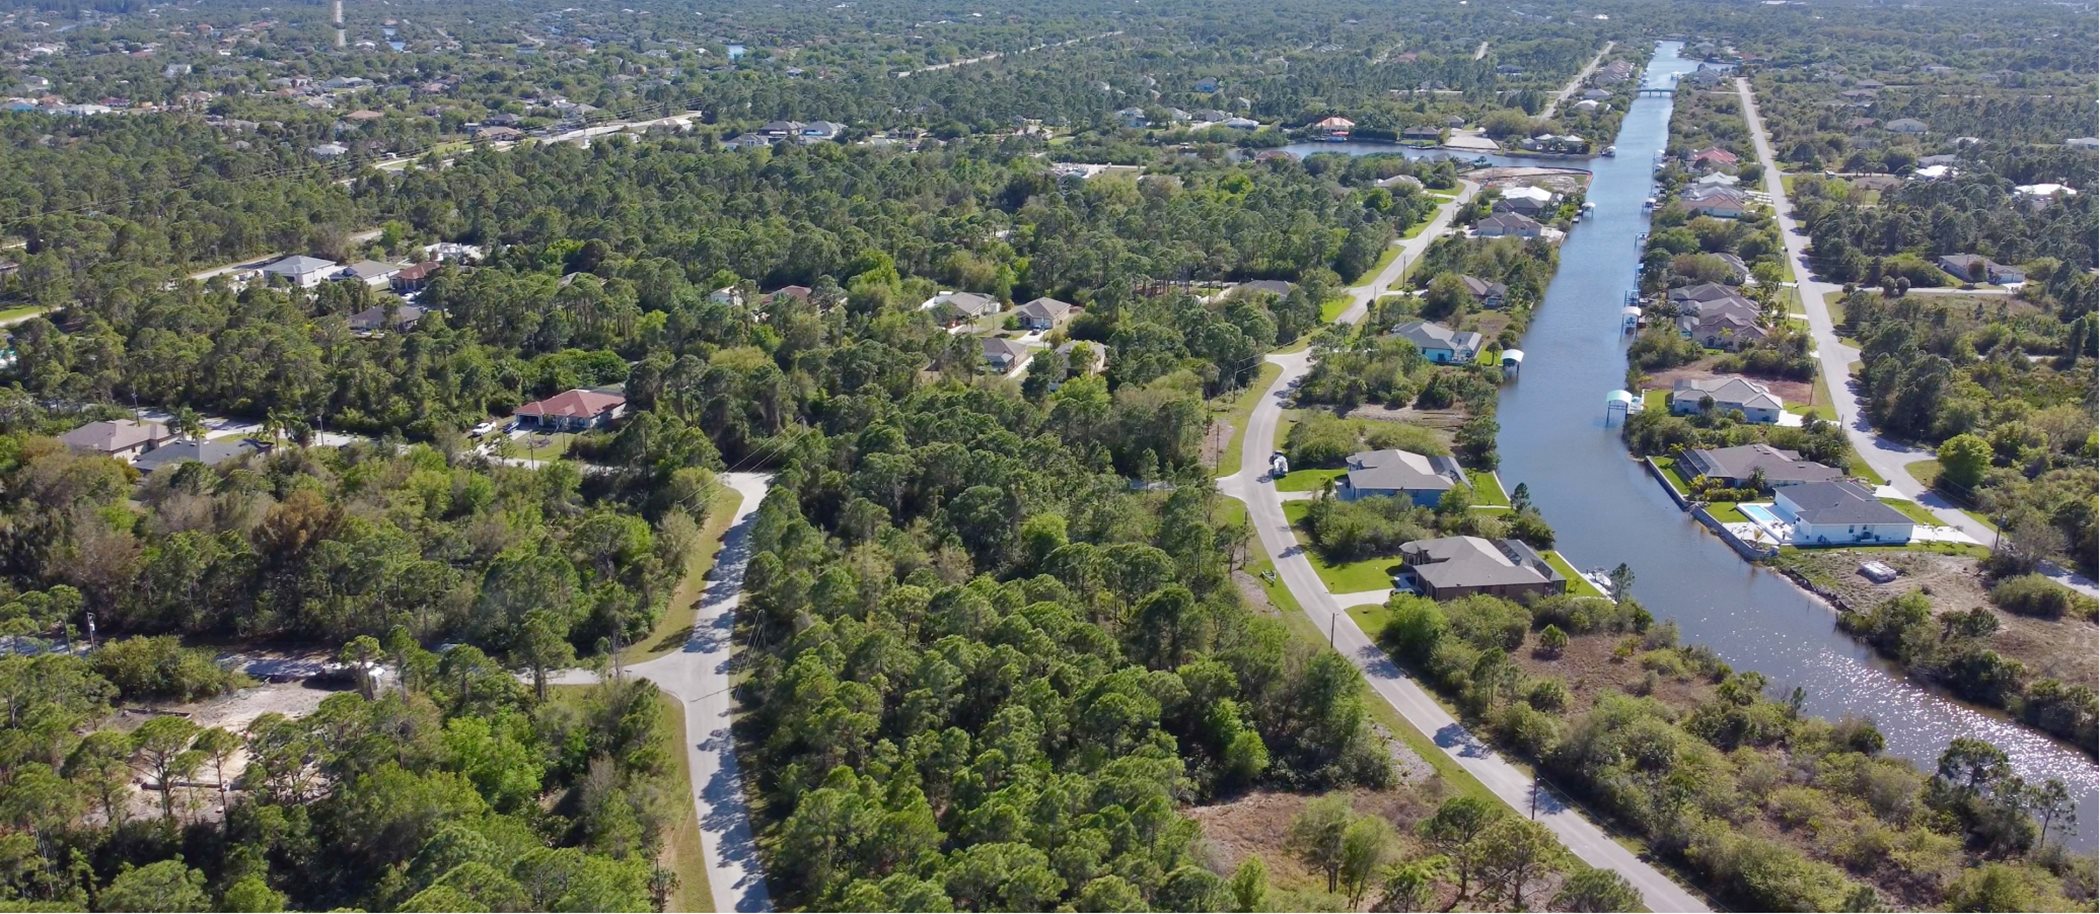 Aerial view of South Gulf Coast Homes